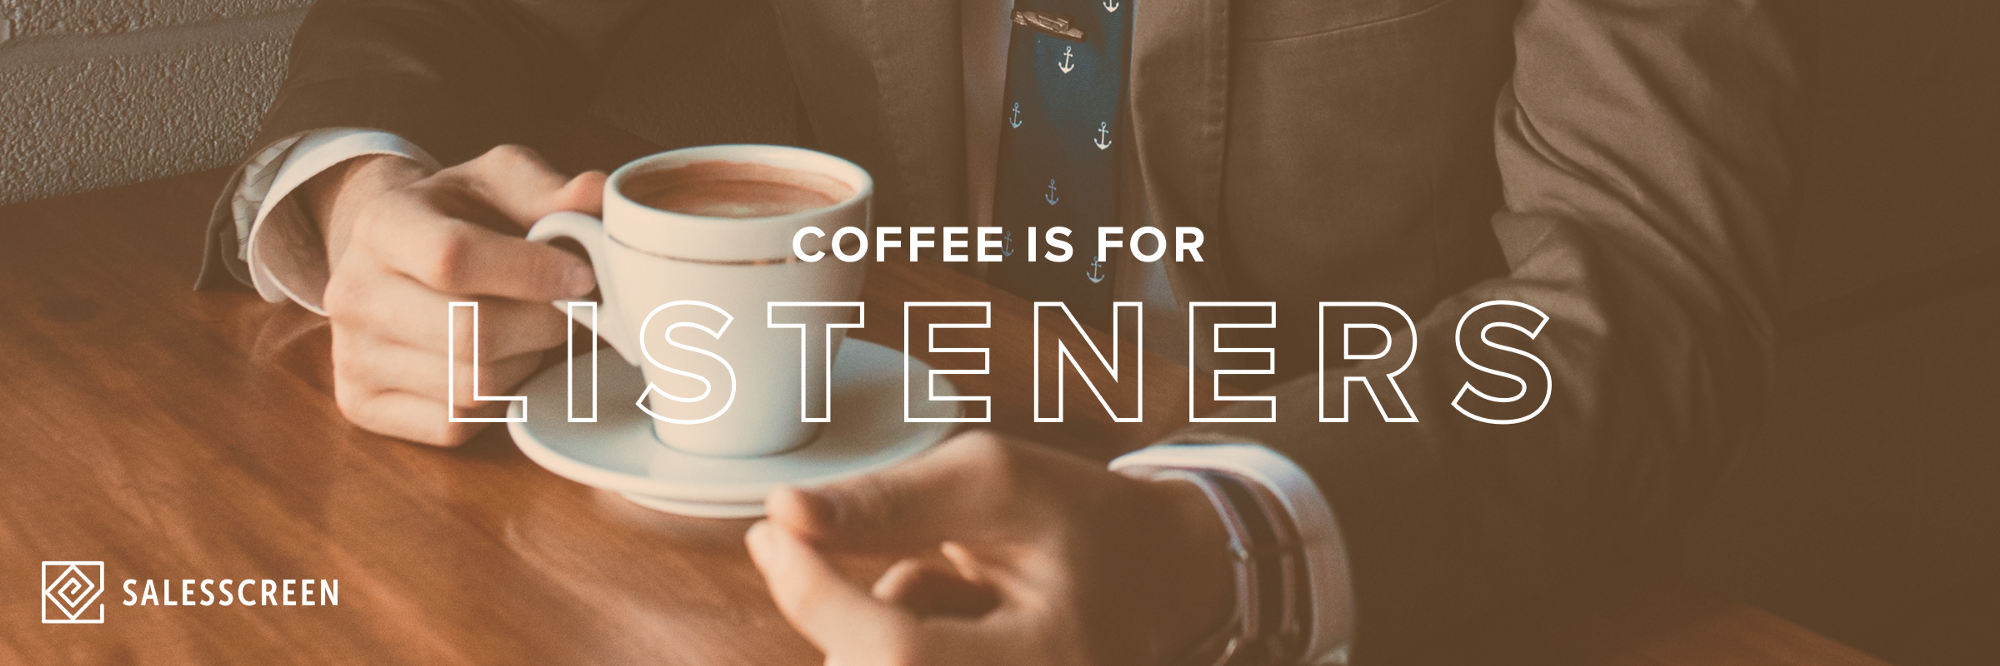 Coffee is for Listeners